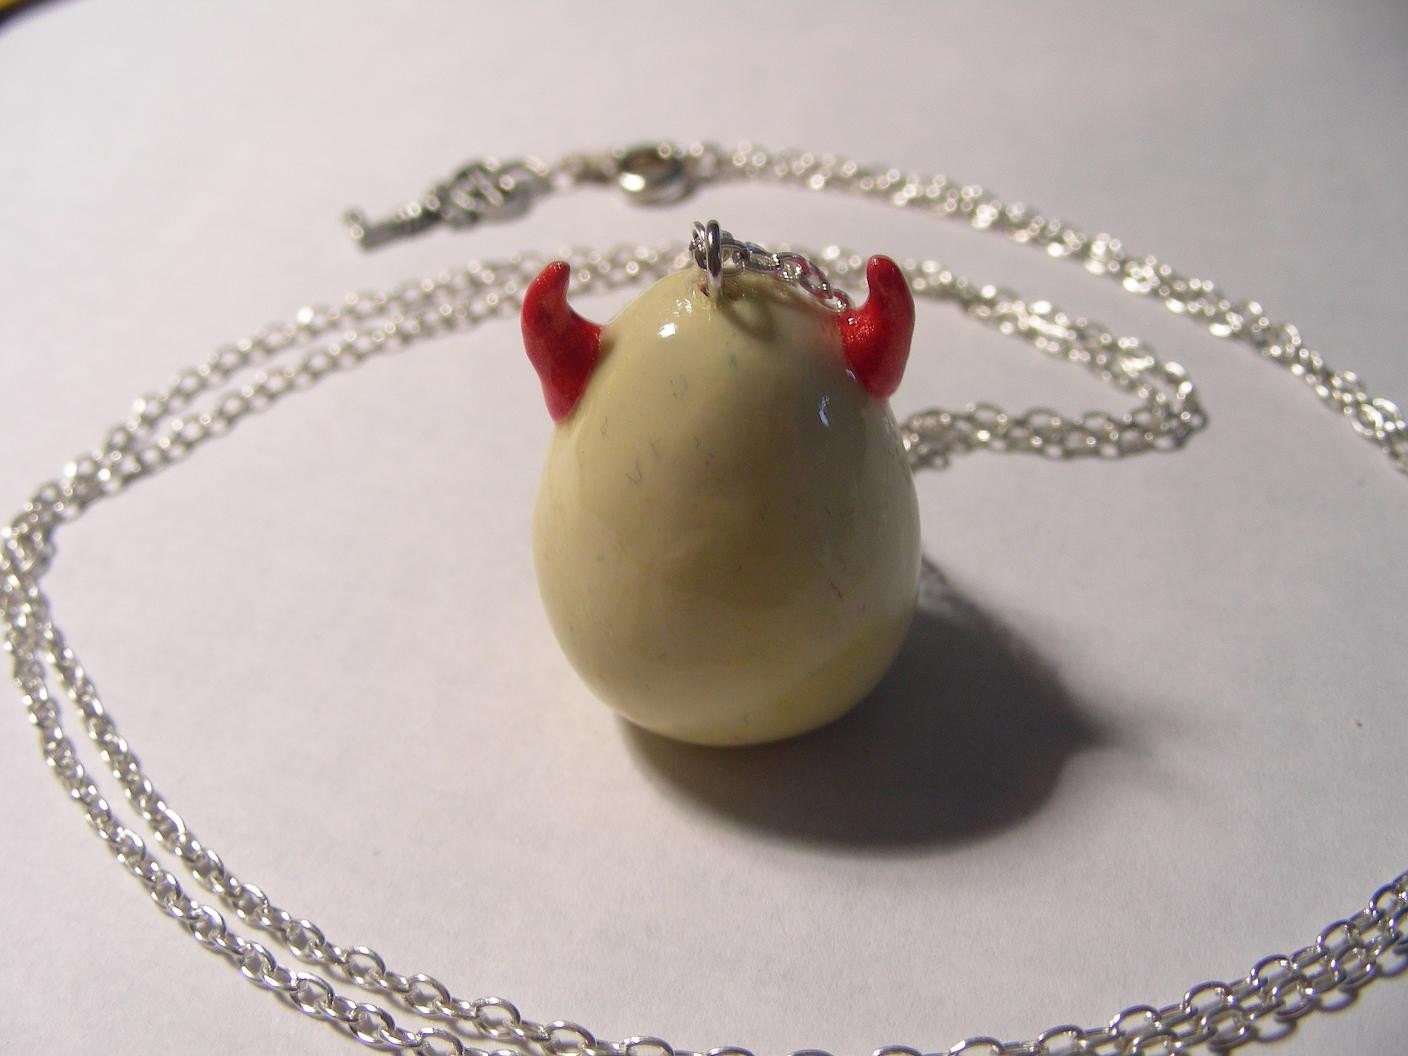 Bad Egg by keyholedesigns on Etsy necklace design jewelry womens